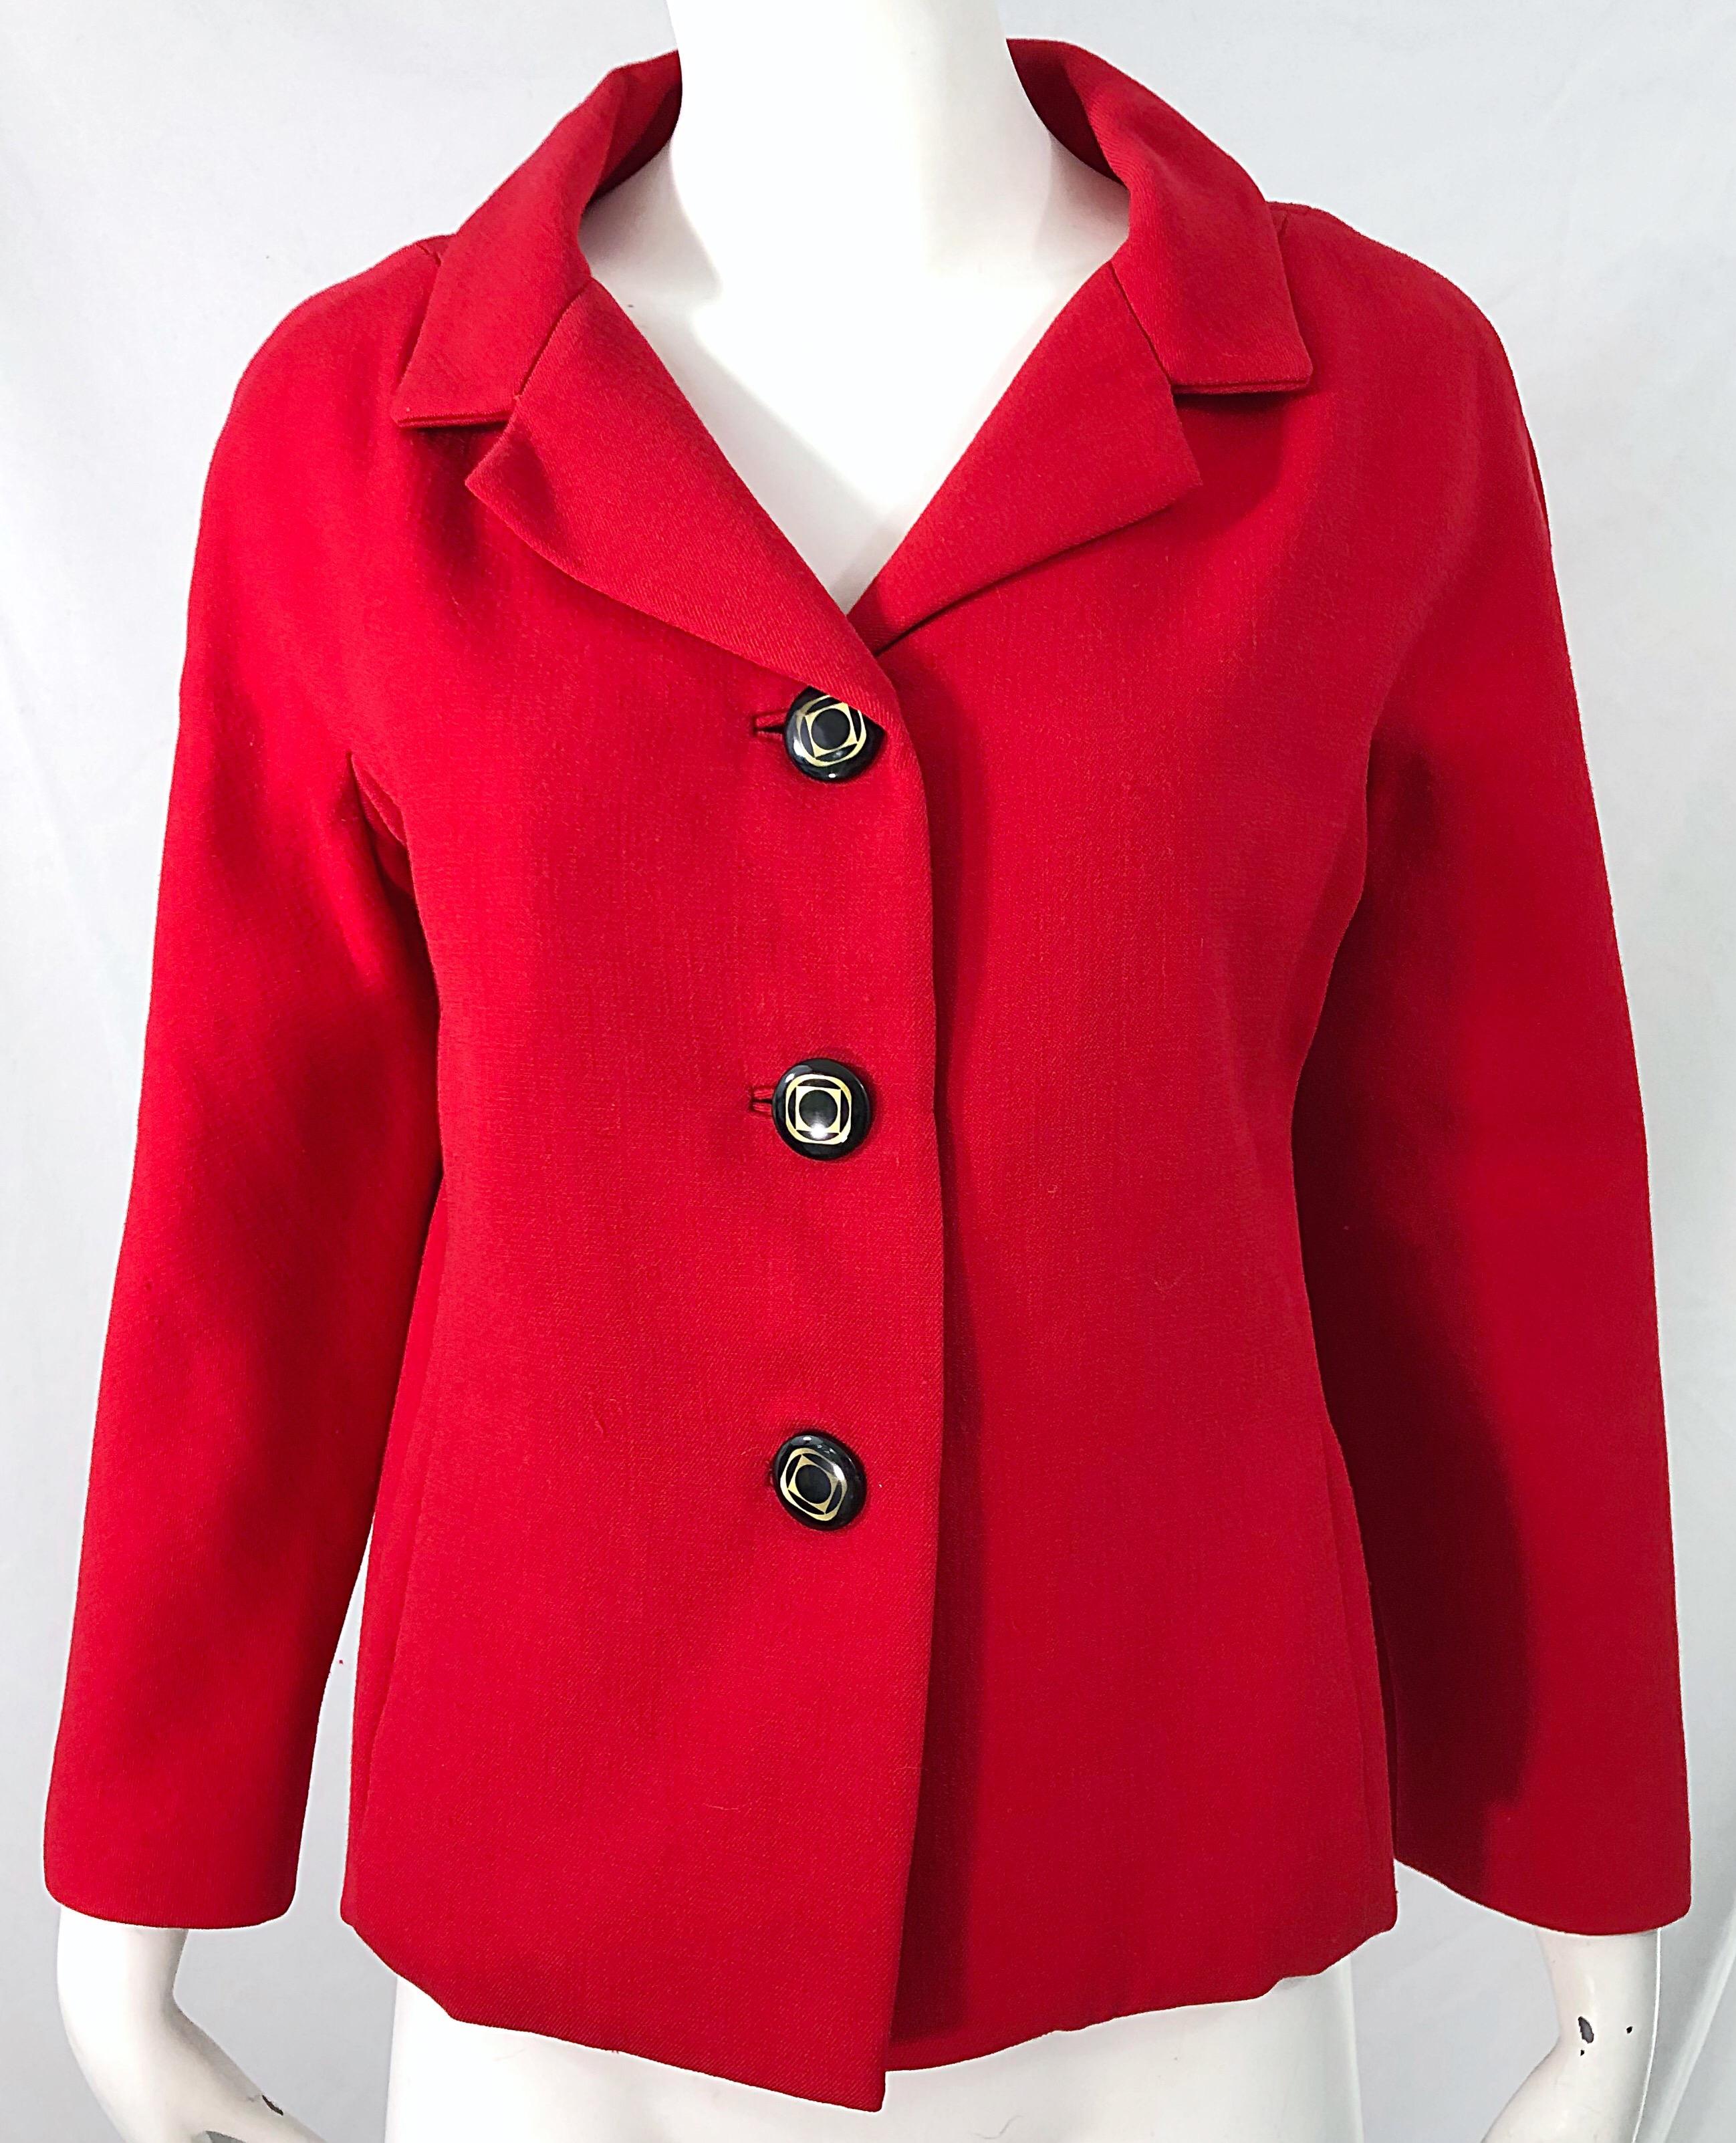 1960s Teal Traina Lipstick Red Mod Vintage Early 60s Wool Swing Jacket For Sale 3